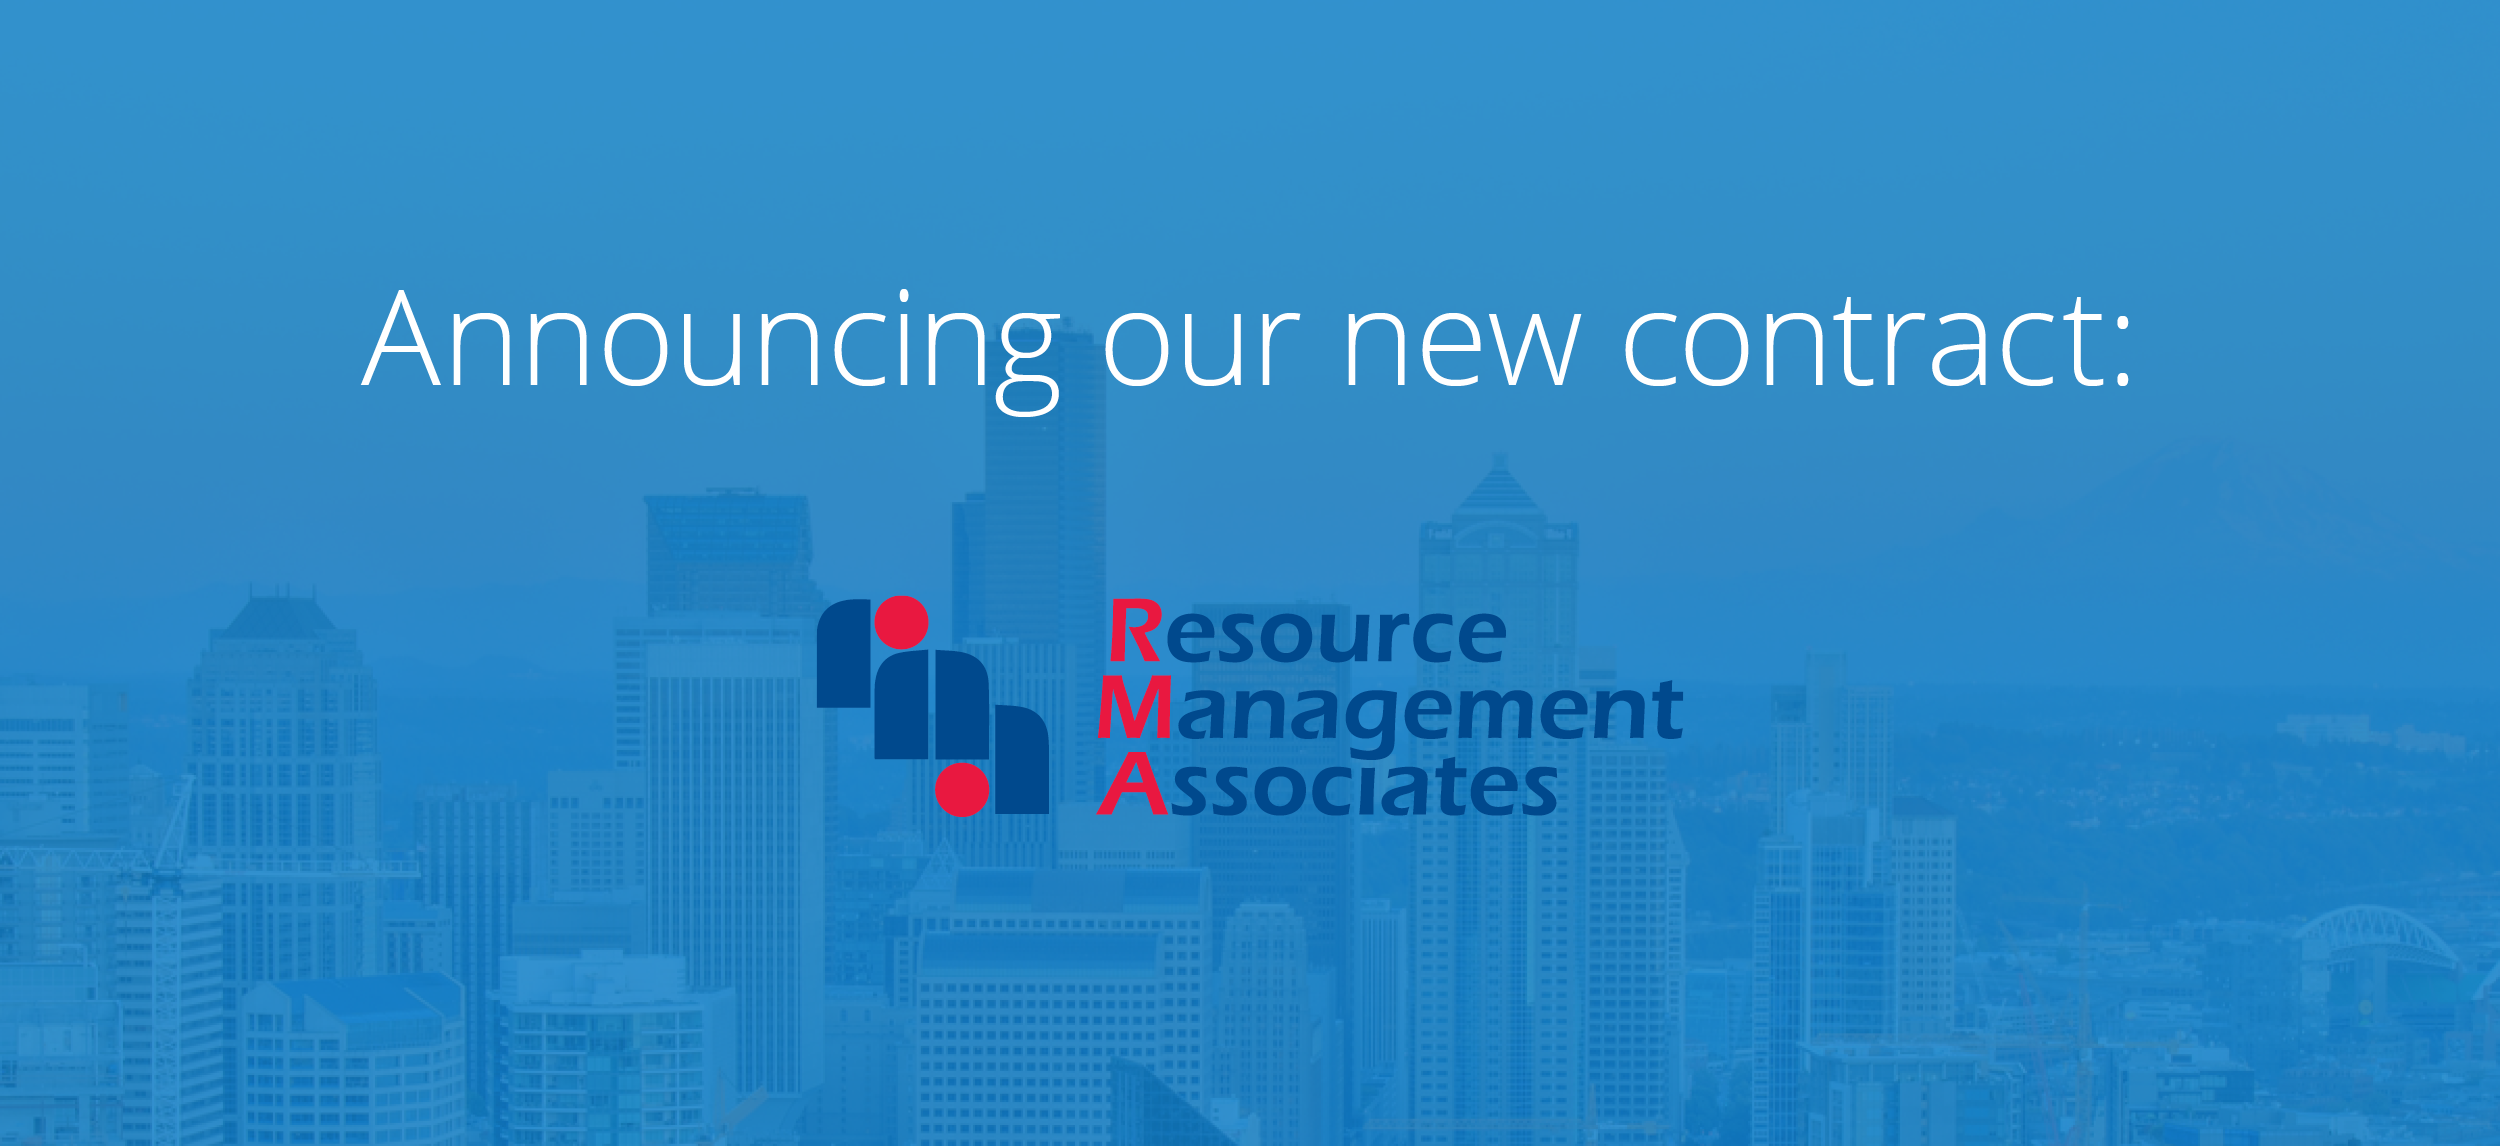 Announcing Resource Management Associates: Our Newest Contract